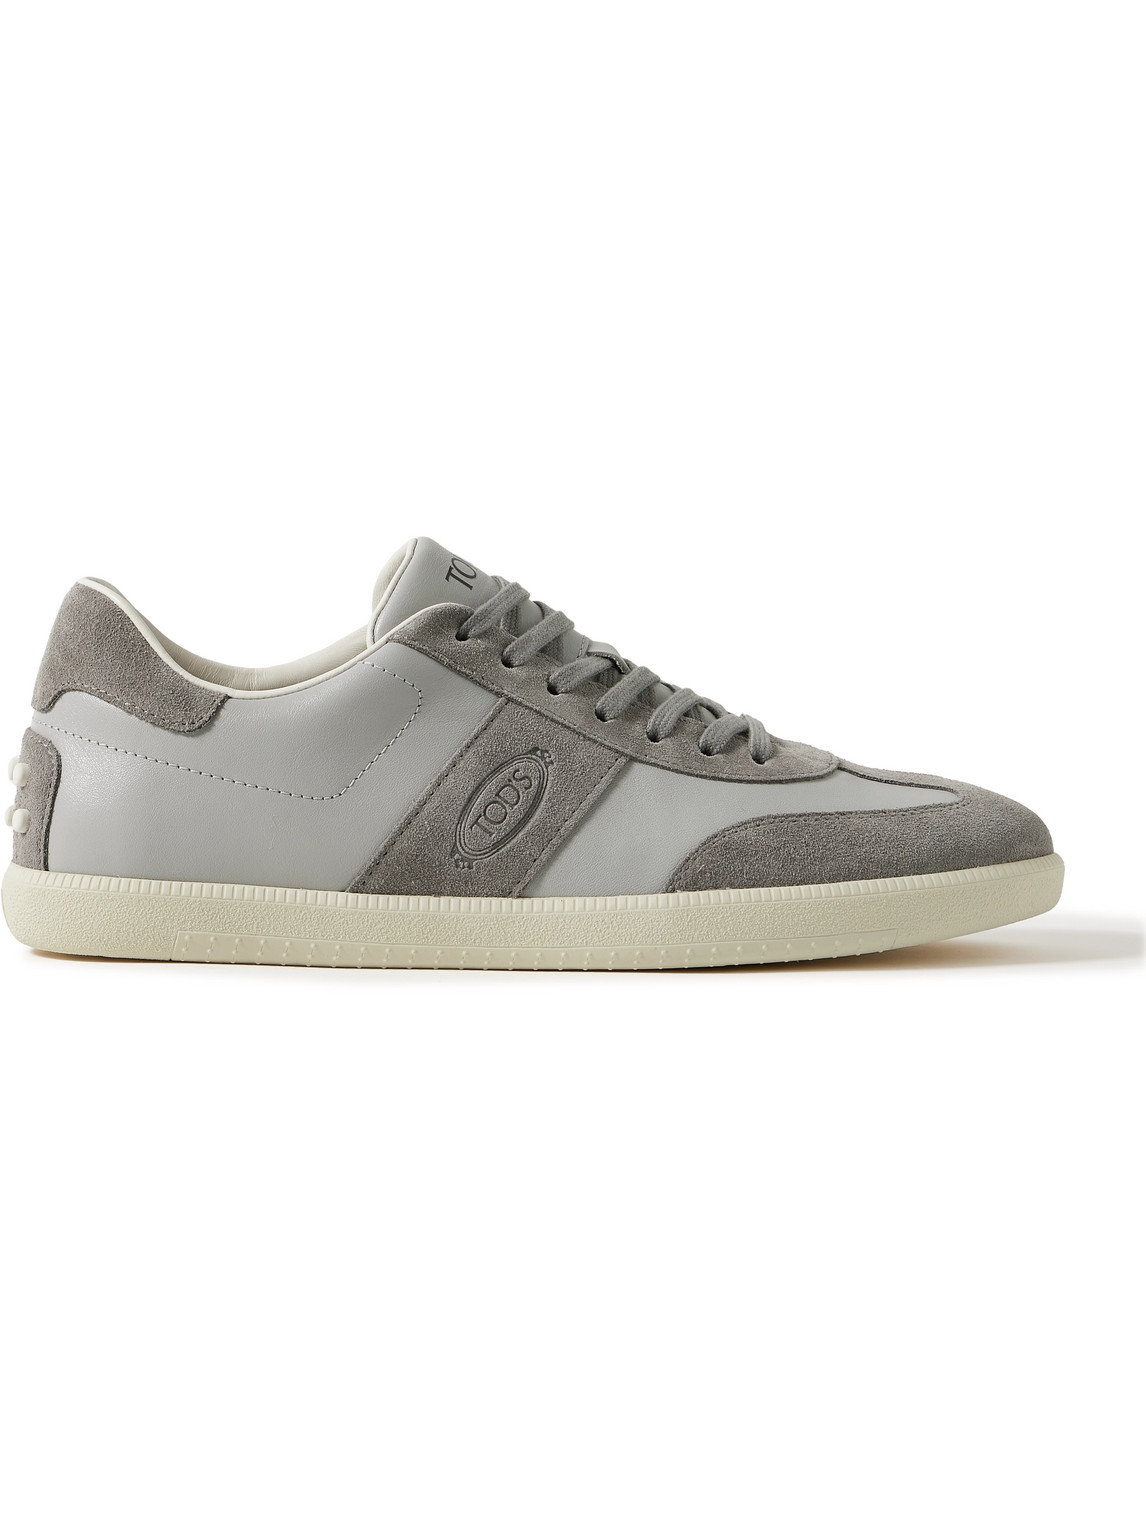 Tod's - Rubber-Trimmed Leather and Suede Sneakers - Men - Gray - UK 9.5 von Tod's